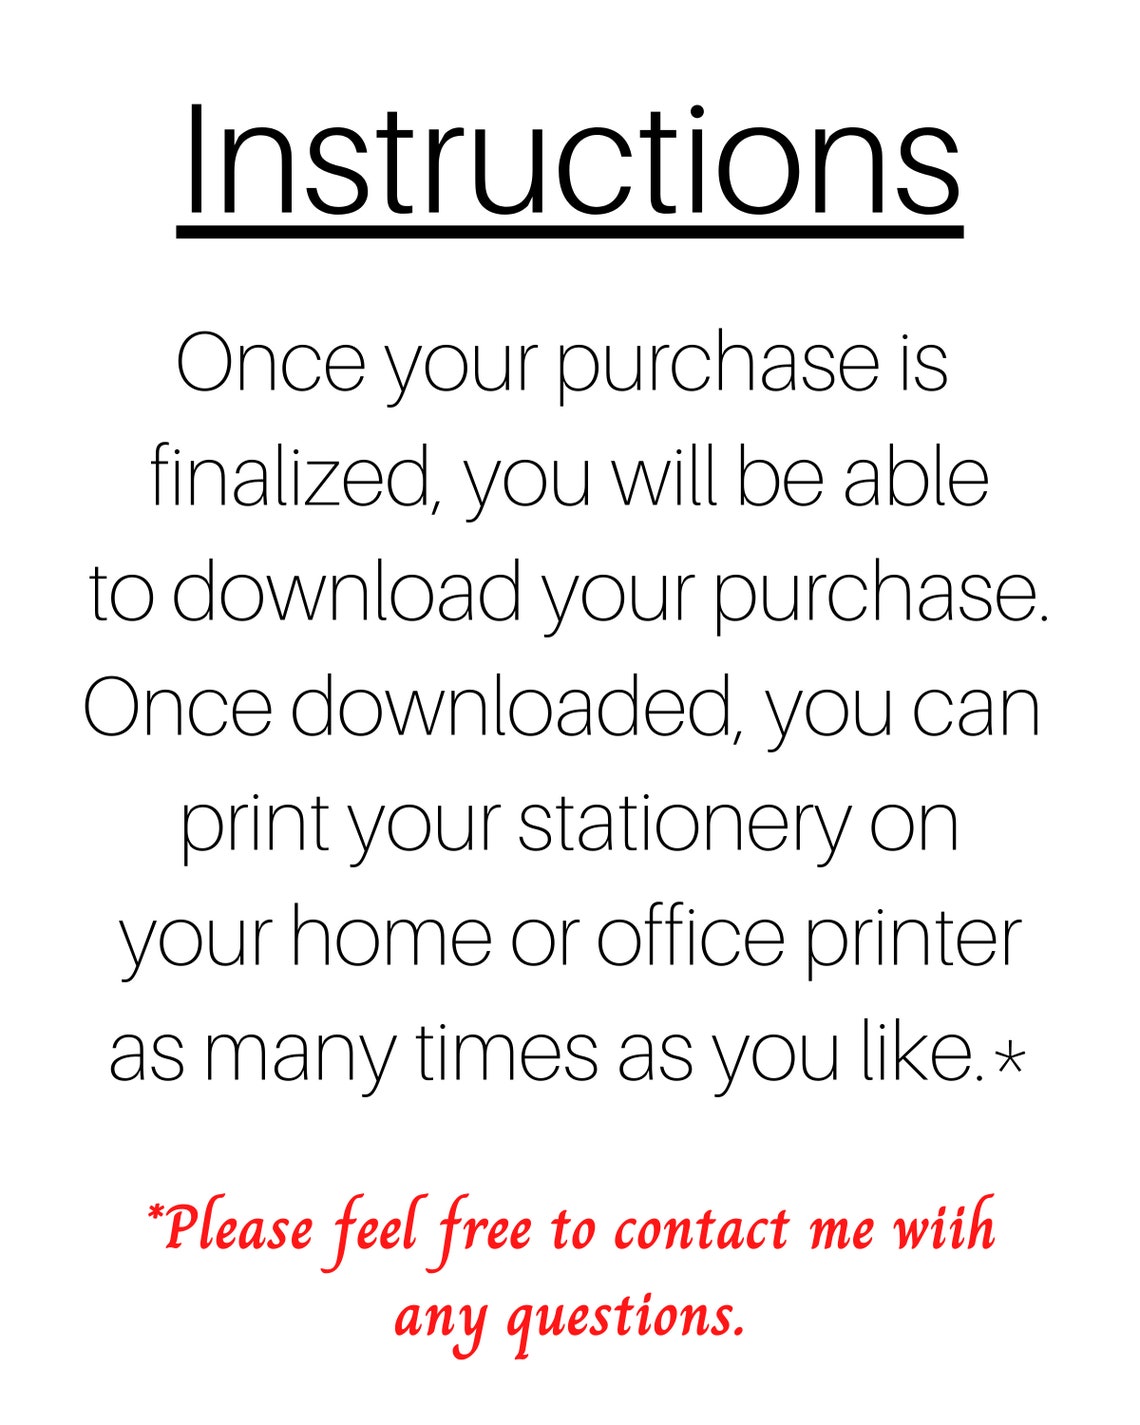 Printable Grocery List Shopping List PDF and PNG - Etsy